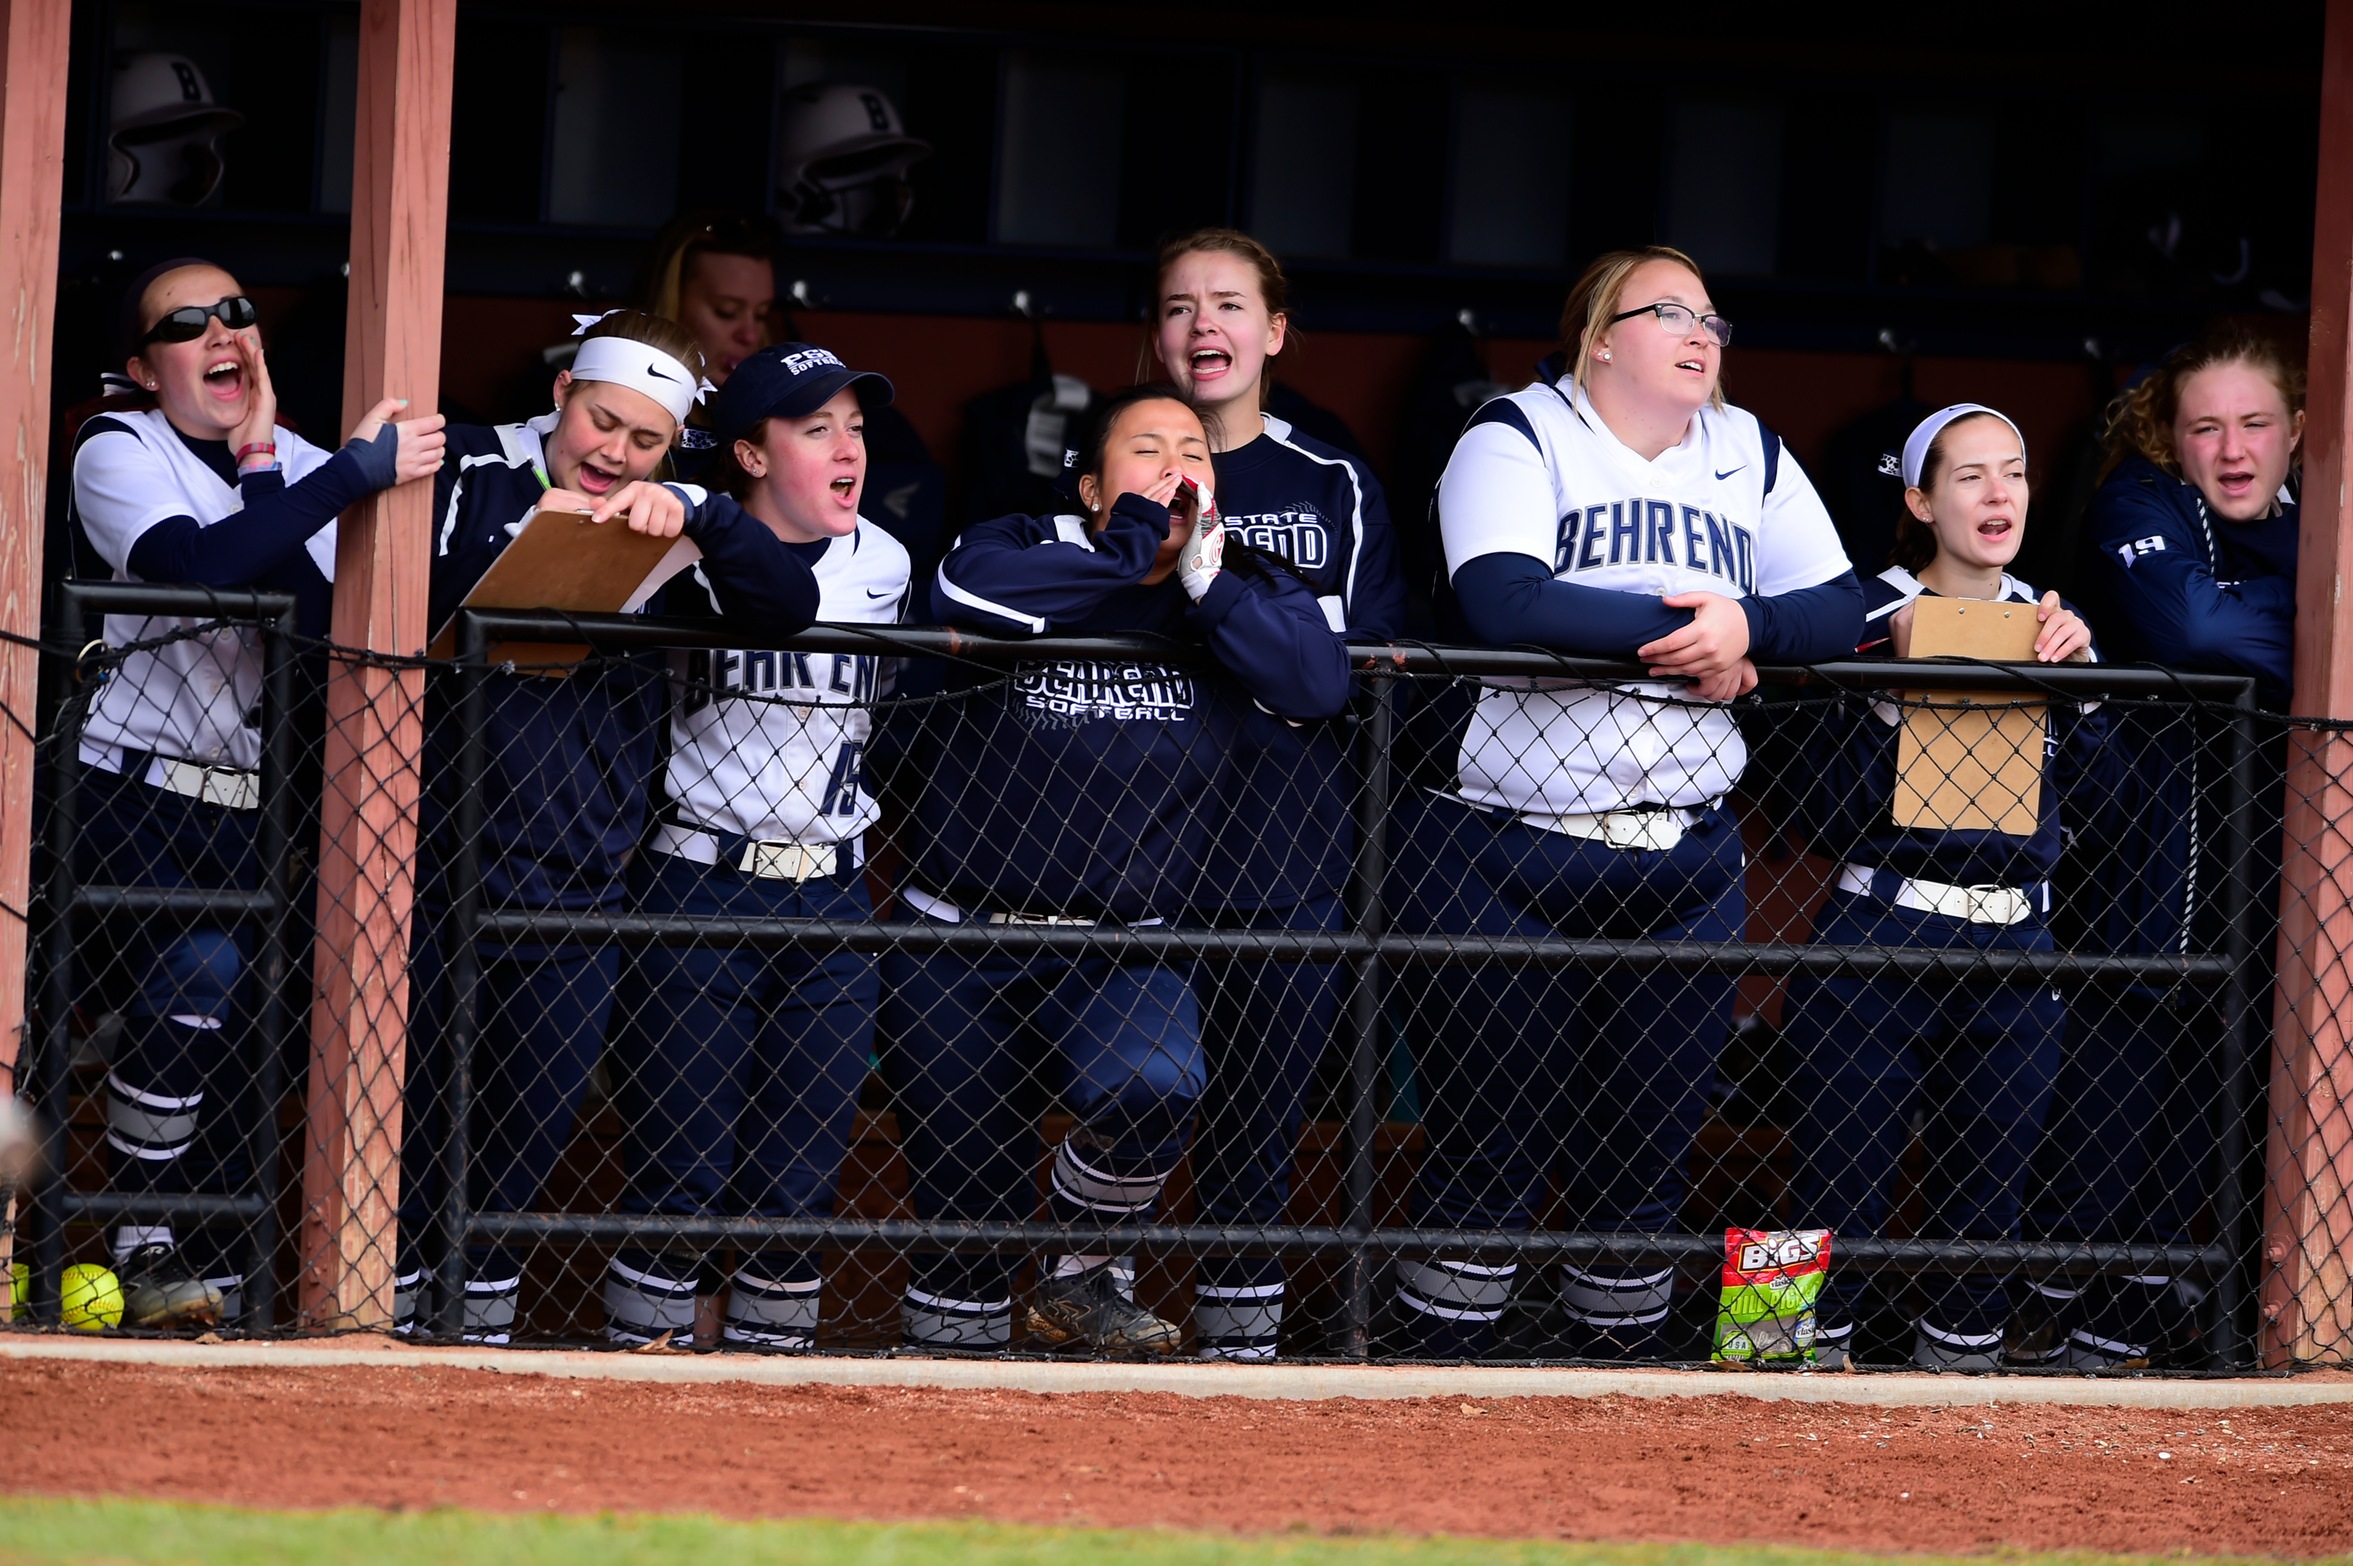 Behrend Softball Picked to Finish Second in AMCC Preseason Poll